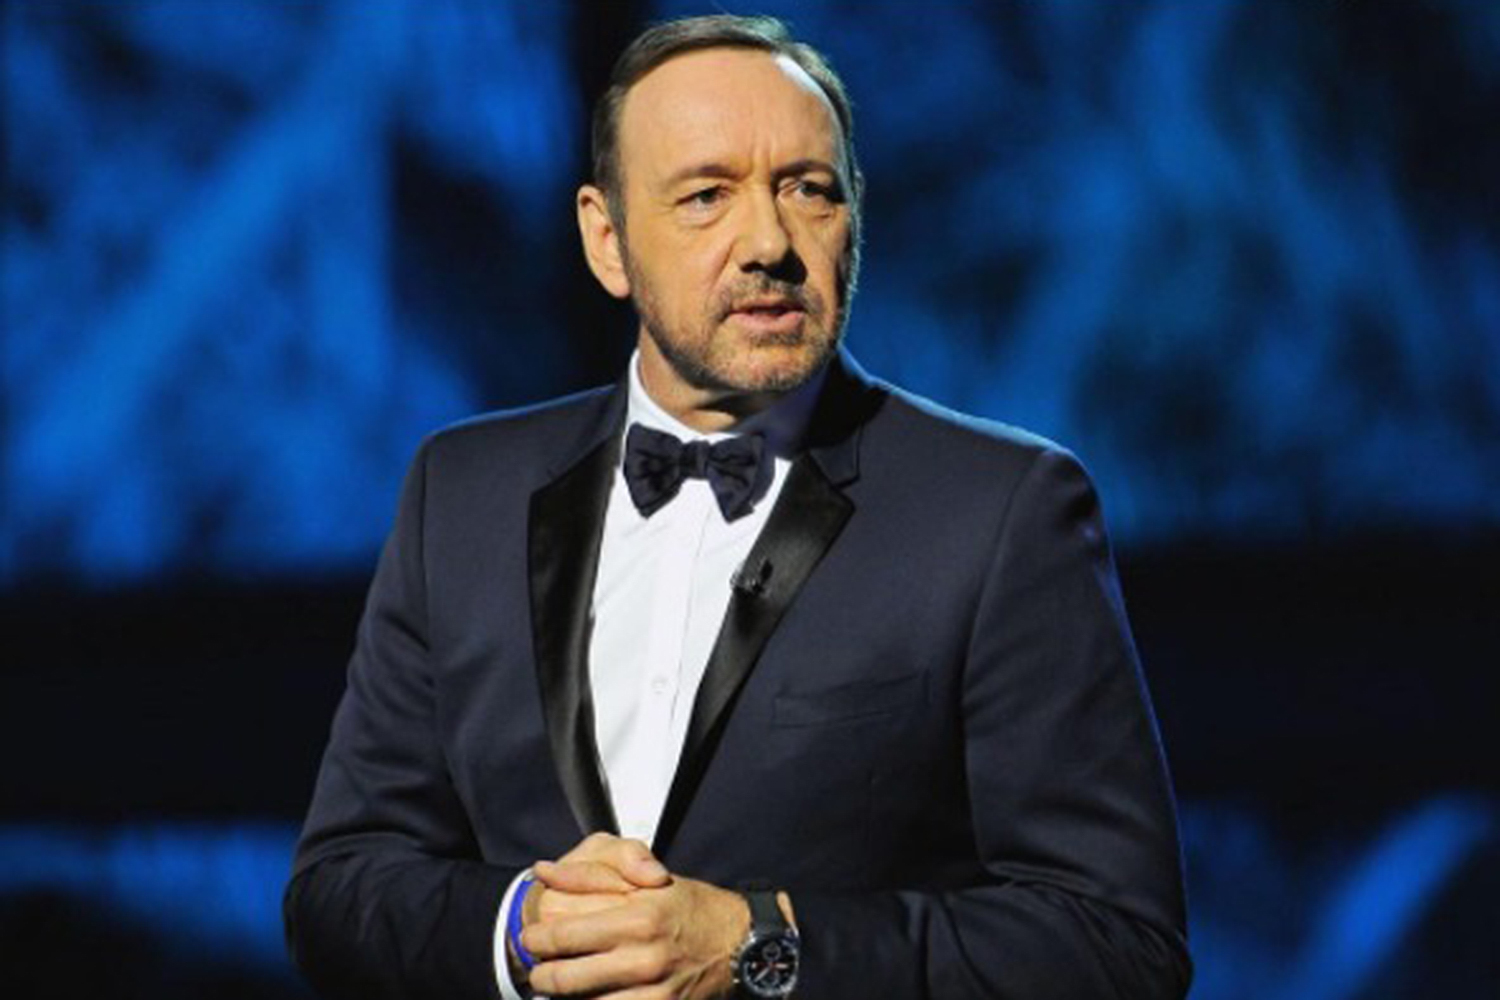 Ator Kevin Spacey